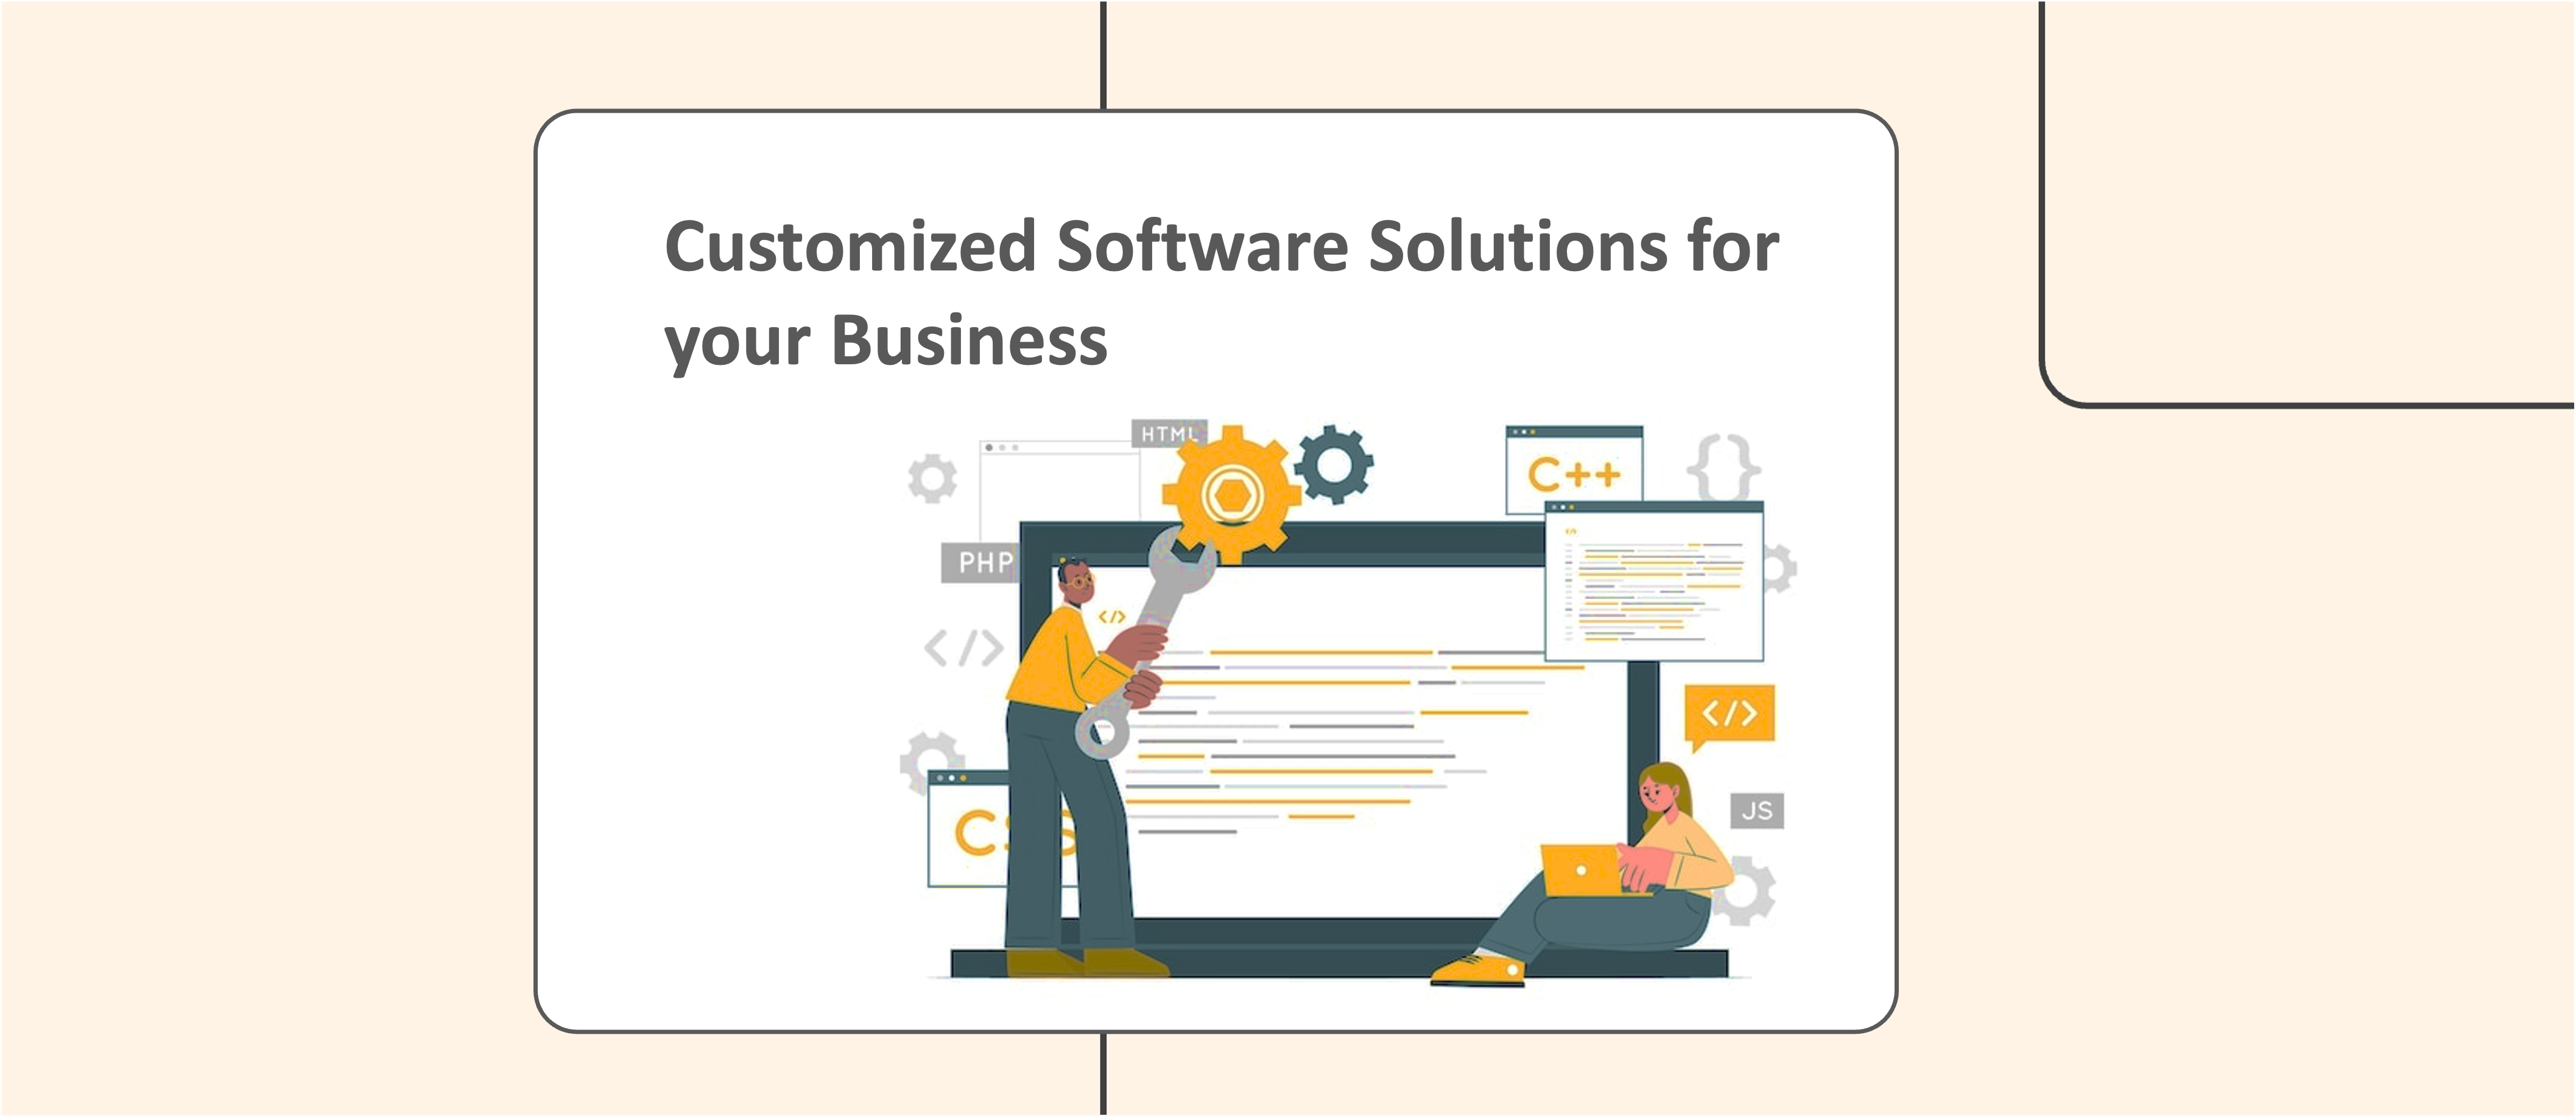 5 Essential Things to Get Best Customized Software for Your Business